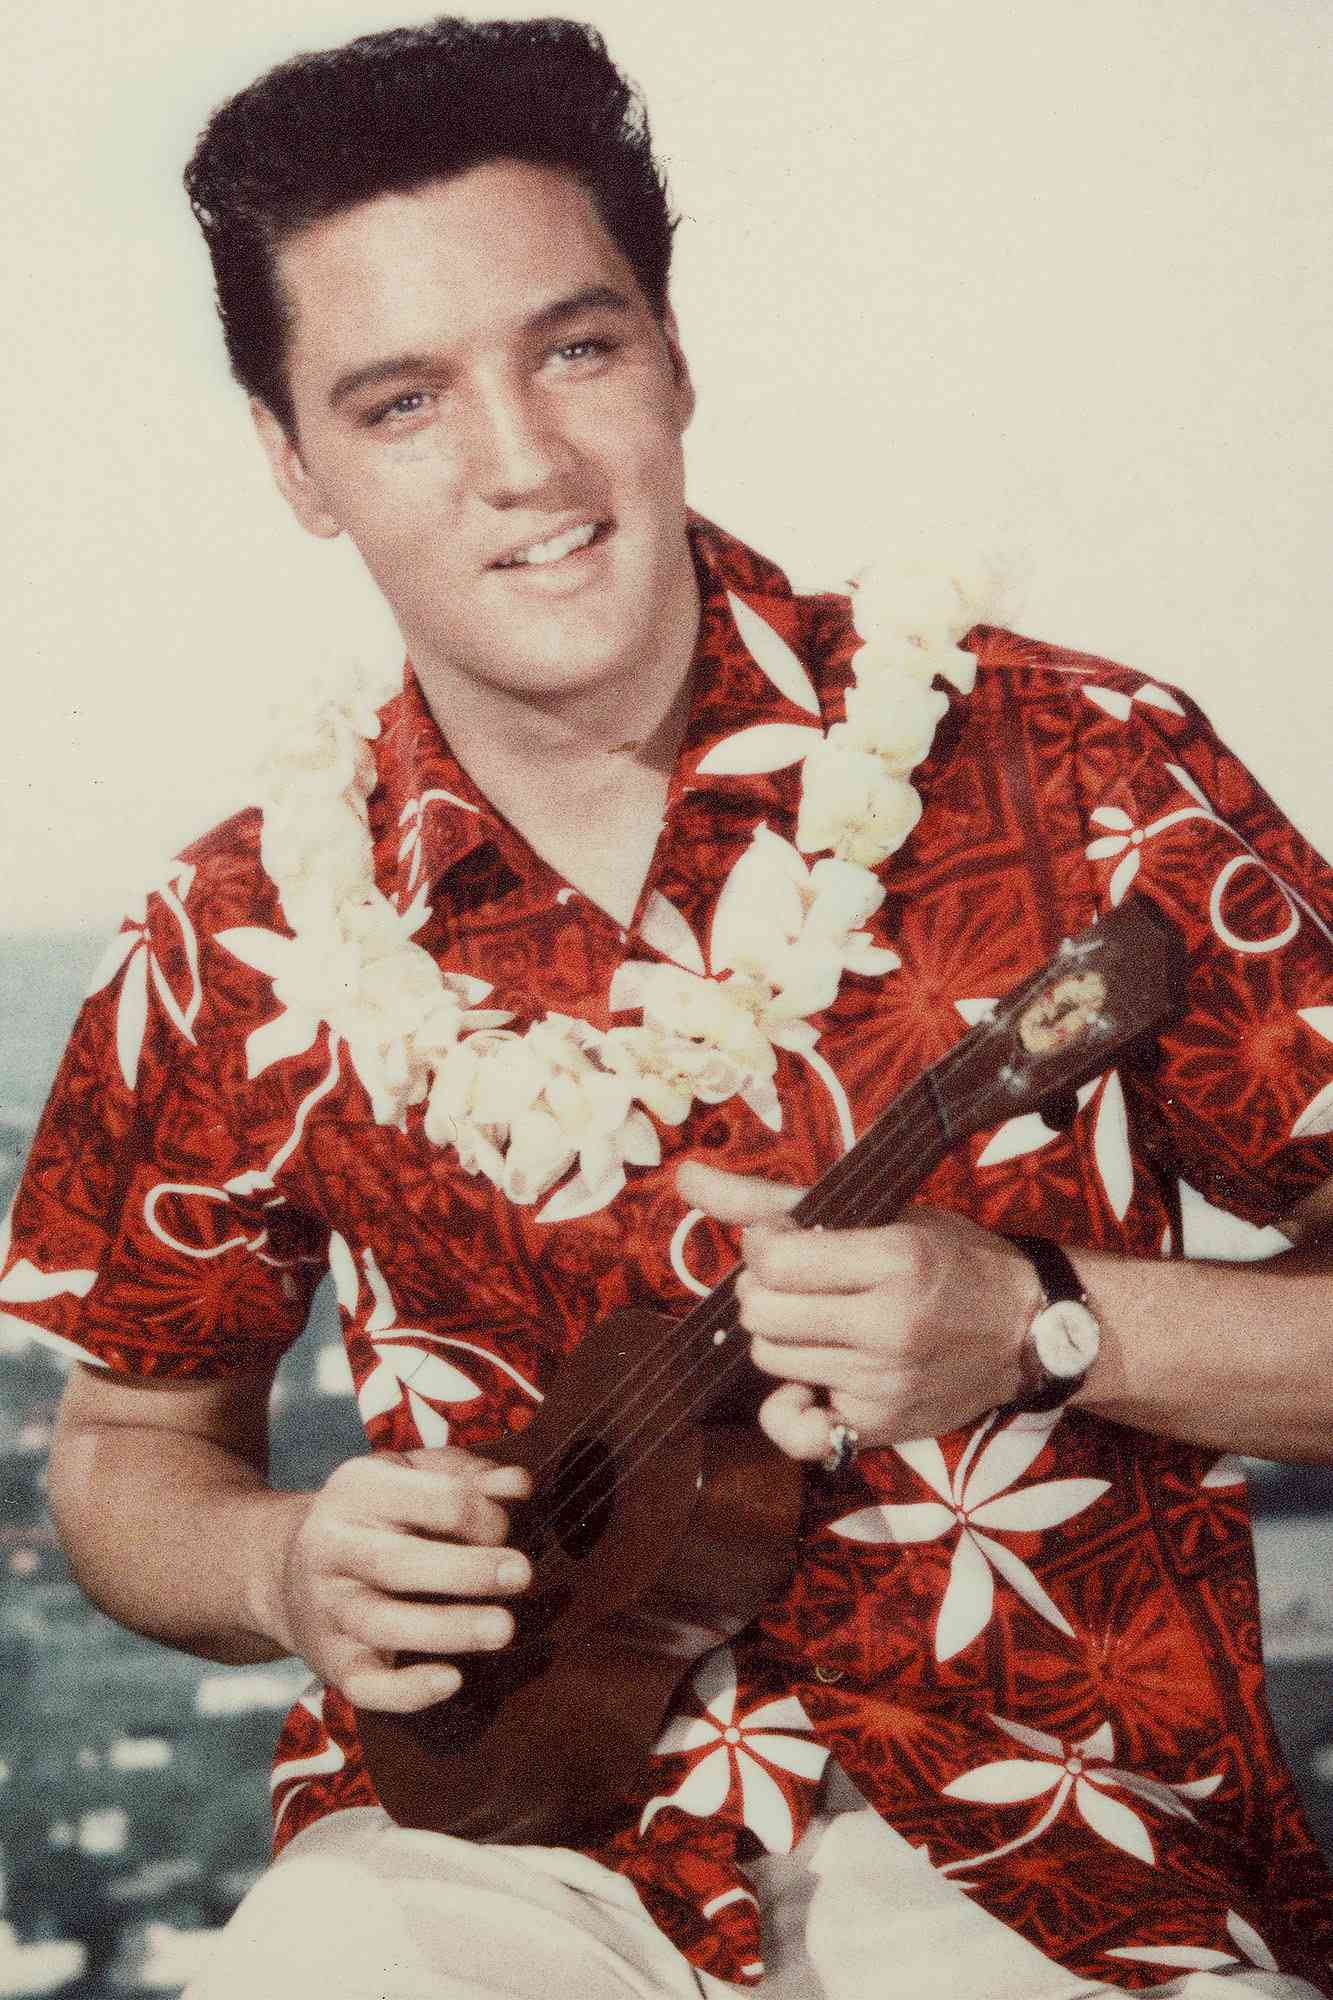 American rock n' roll singer Elvis Presley plays a ukelele, wearing a Hawaiian shirt and lei, in a still from the film 'Blue Hawaii,' directed by Norman Taurog, 1961. (Photo by Paramount Pictures/Courtesy of Getty Images)